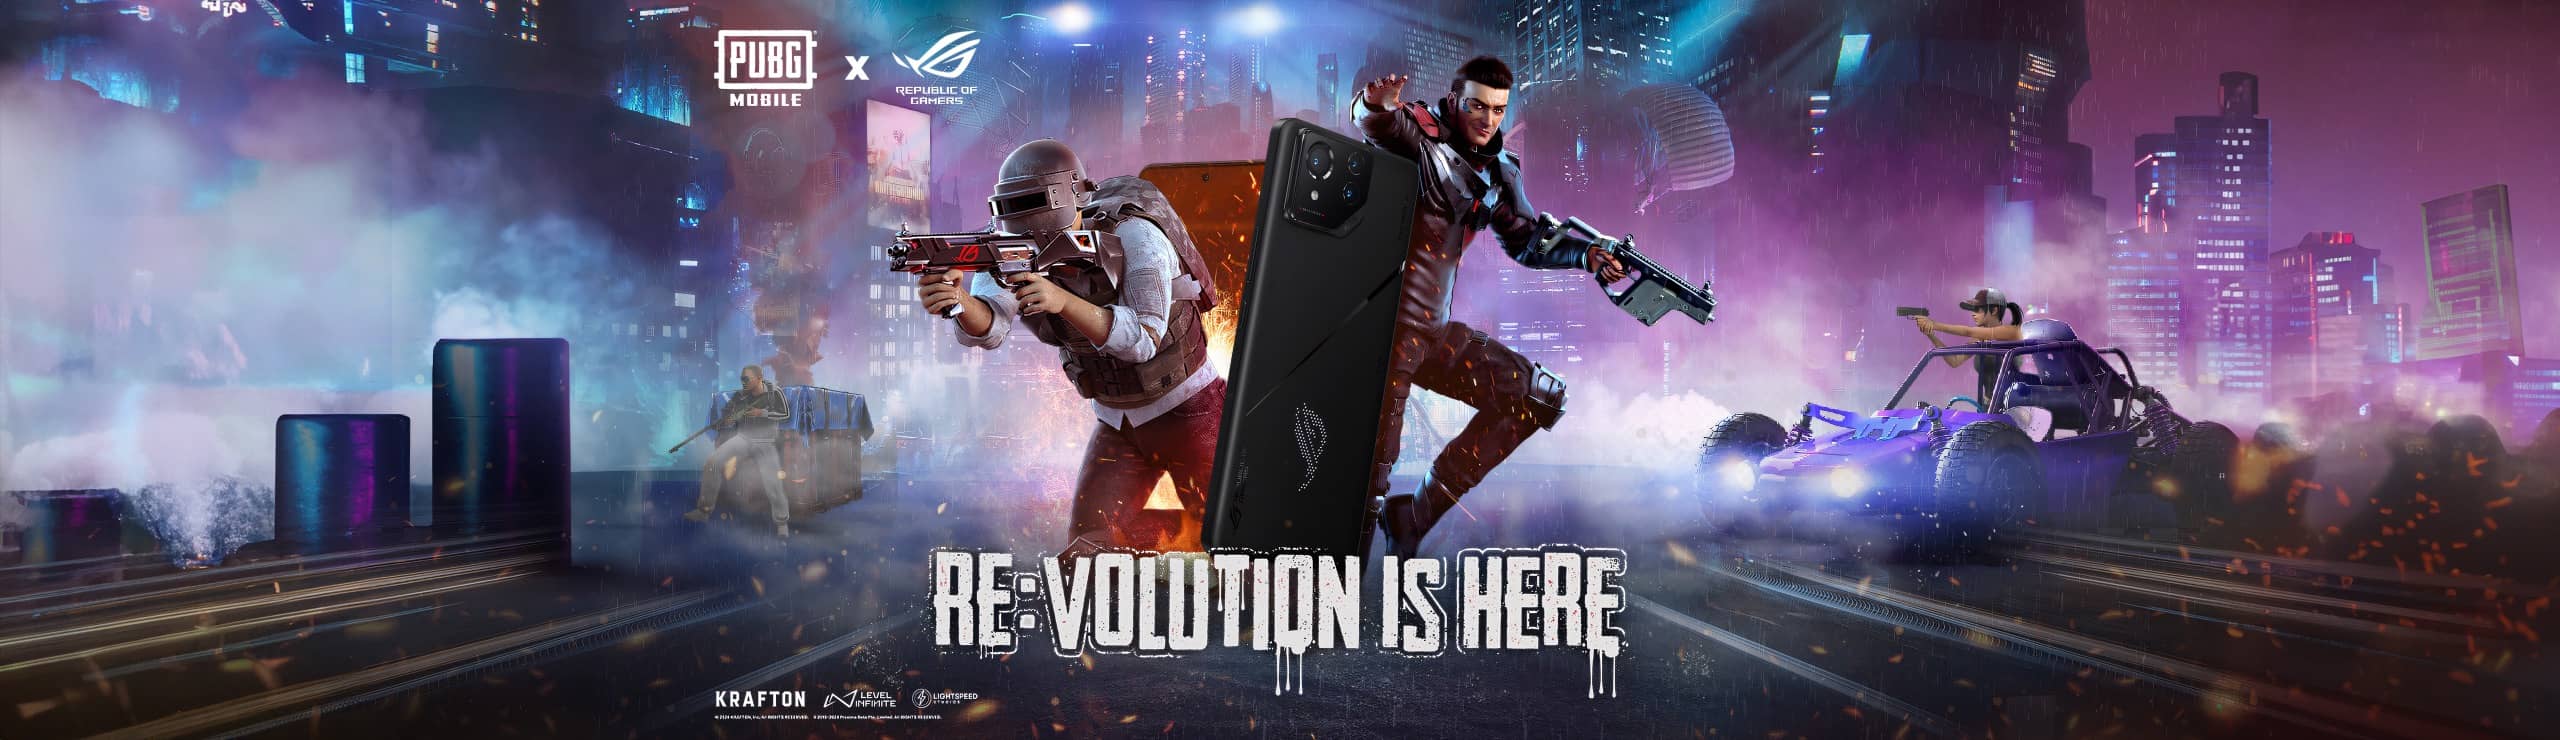 The characters from ROG SAGA and PUBG Mobile stand beside the ROG Phone 8 Pro against a cyberpunk-style background.